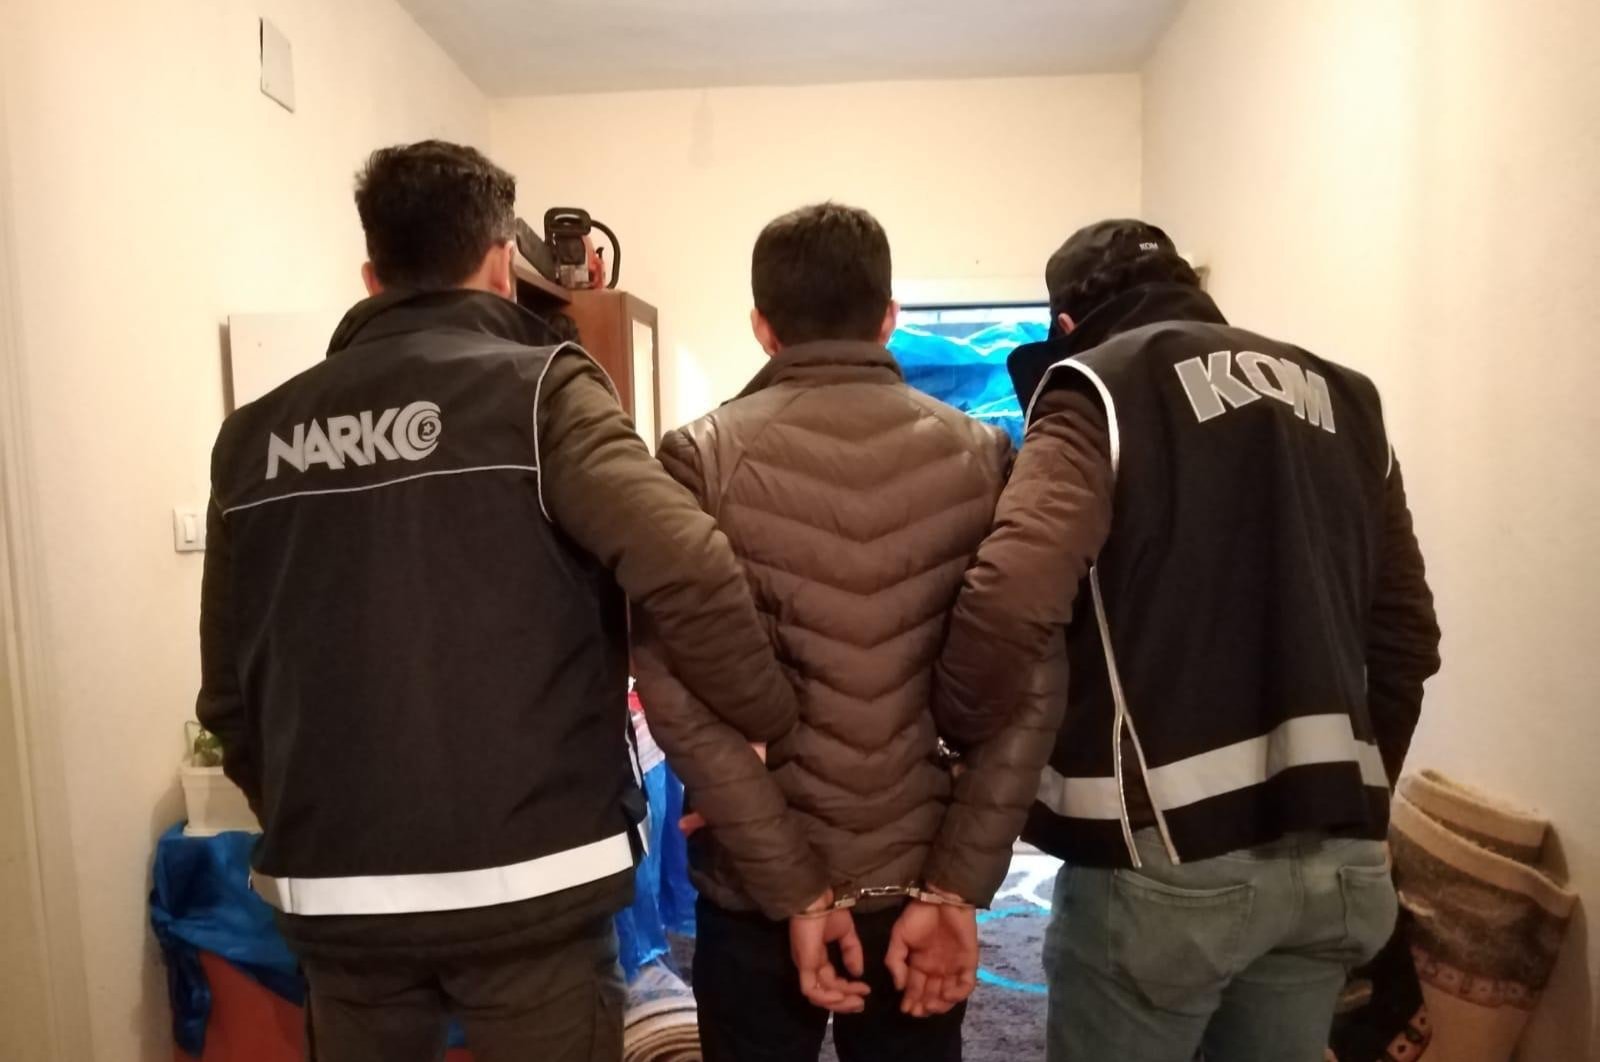 Police officers escort a man captured in counter-narcotics operations, Şırnak, Monday, March 23, 2020. (İHA Photo)